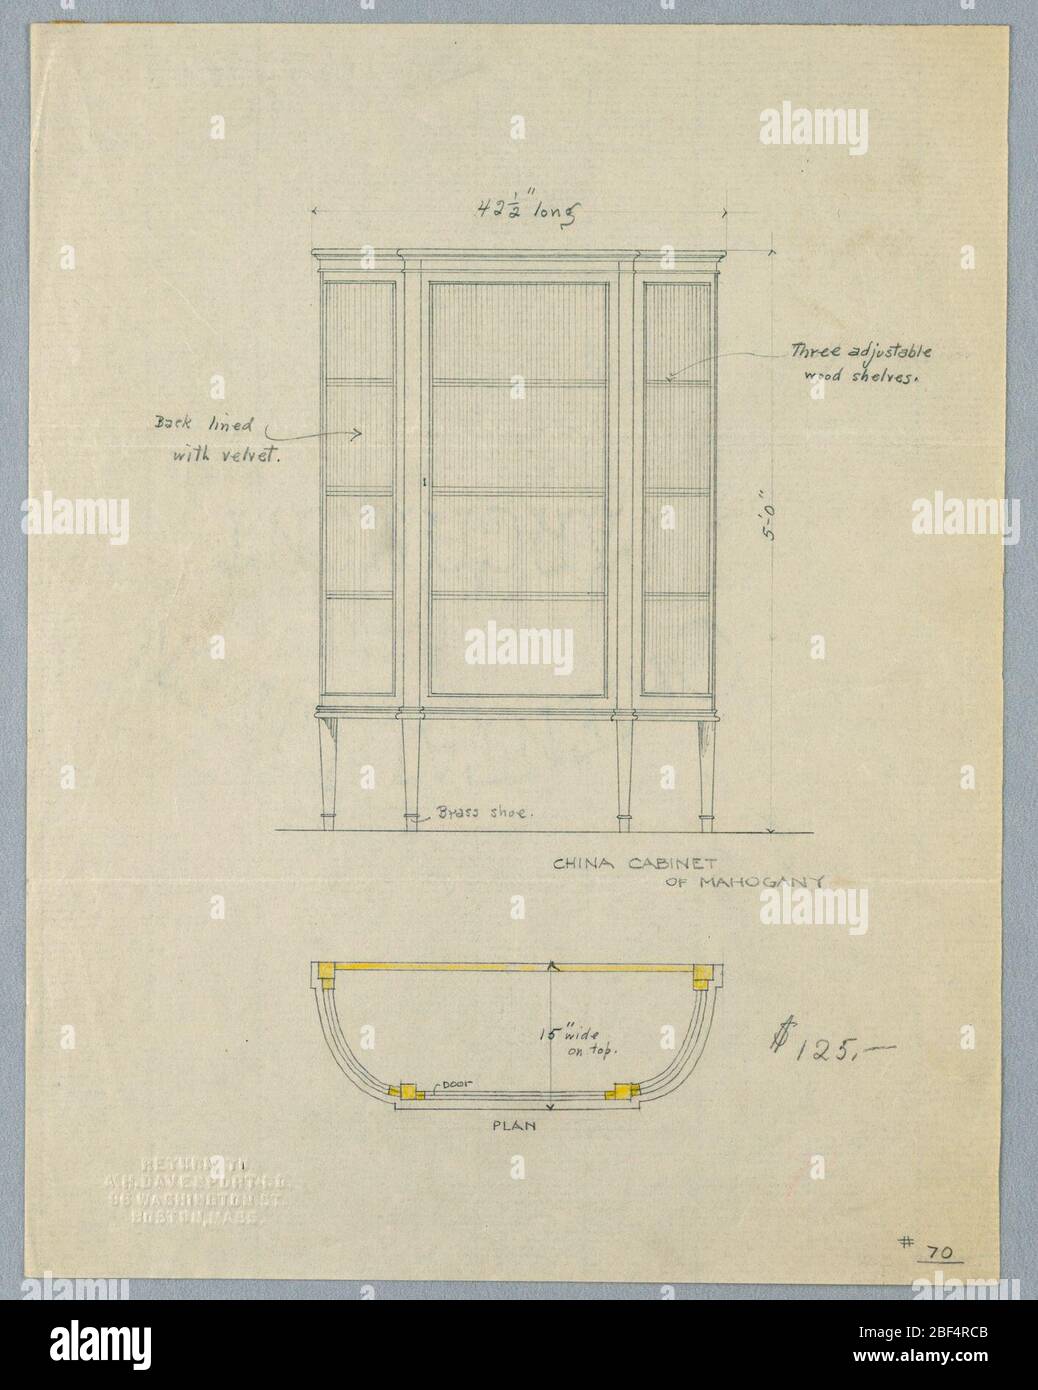 Design for China Cabinet of Mahogany in Elevation and Plan. Elevation: rectangular tri-partite front with glass door and 3 shelves raised on 4 straight tapering legs. Plan: semi-circular cabinet top with flattened central front with details indicated in yellow color pencil. Stock Photo